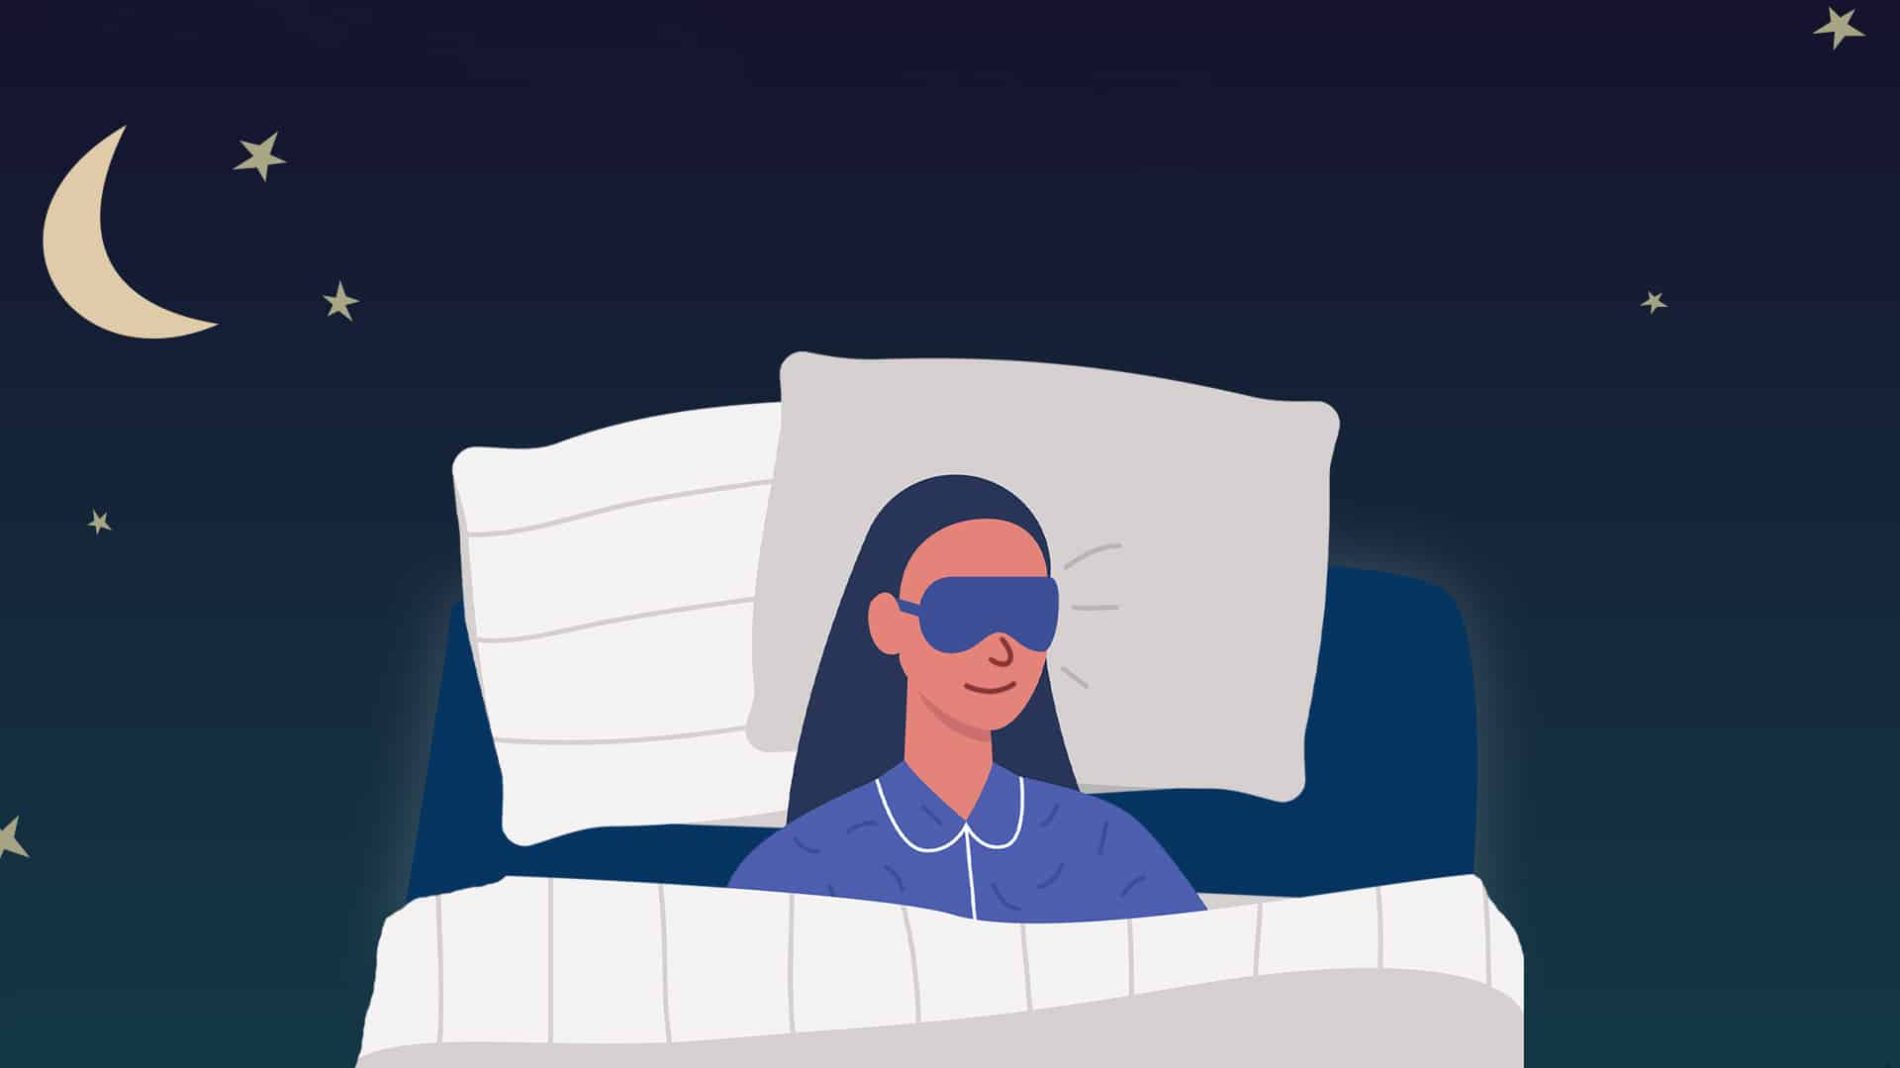 Illustration of a woman in bed with an eyemask on getting a good night's sleep